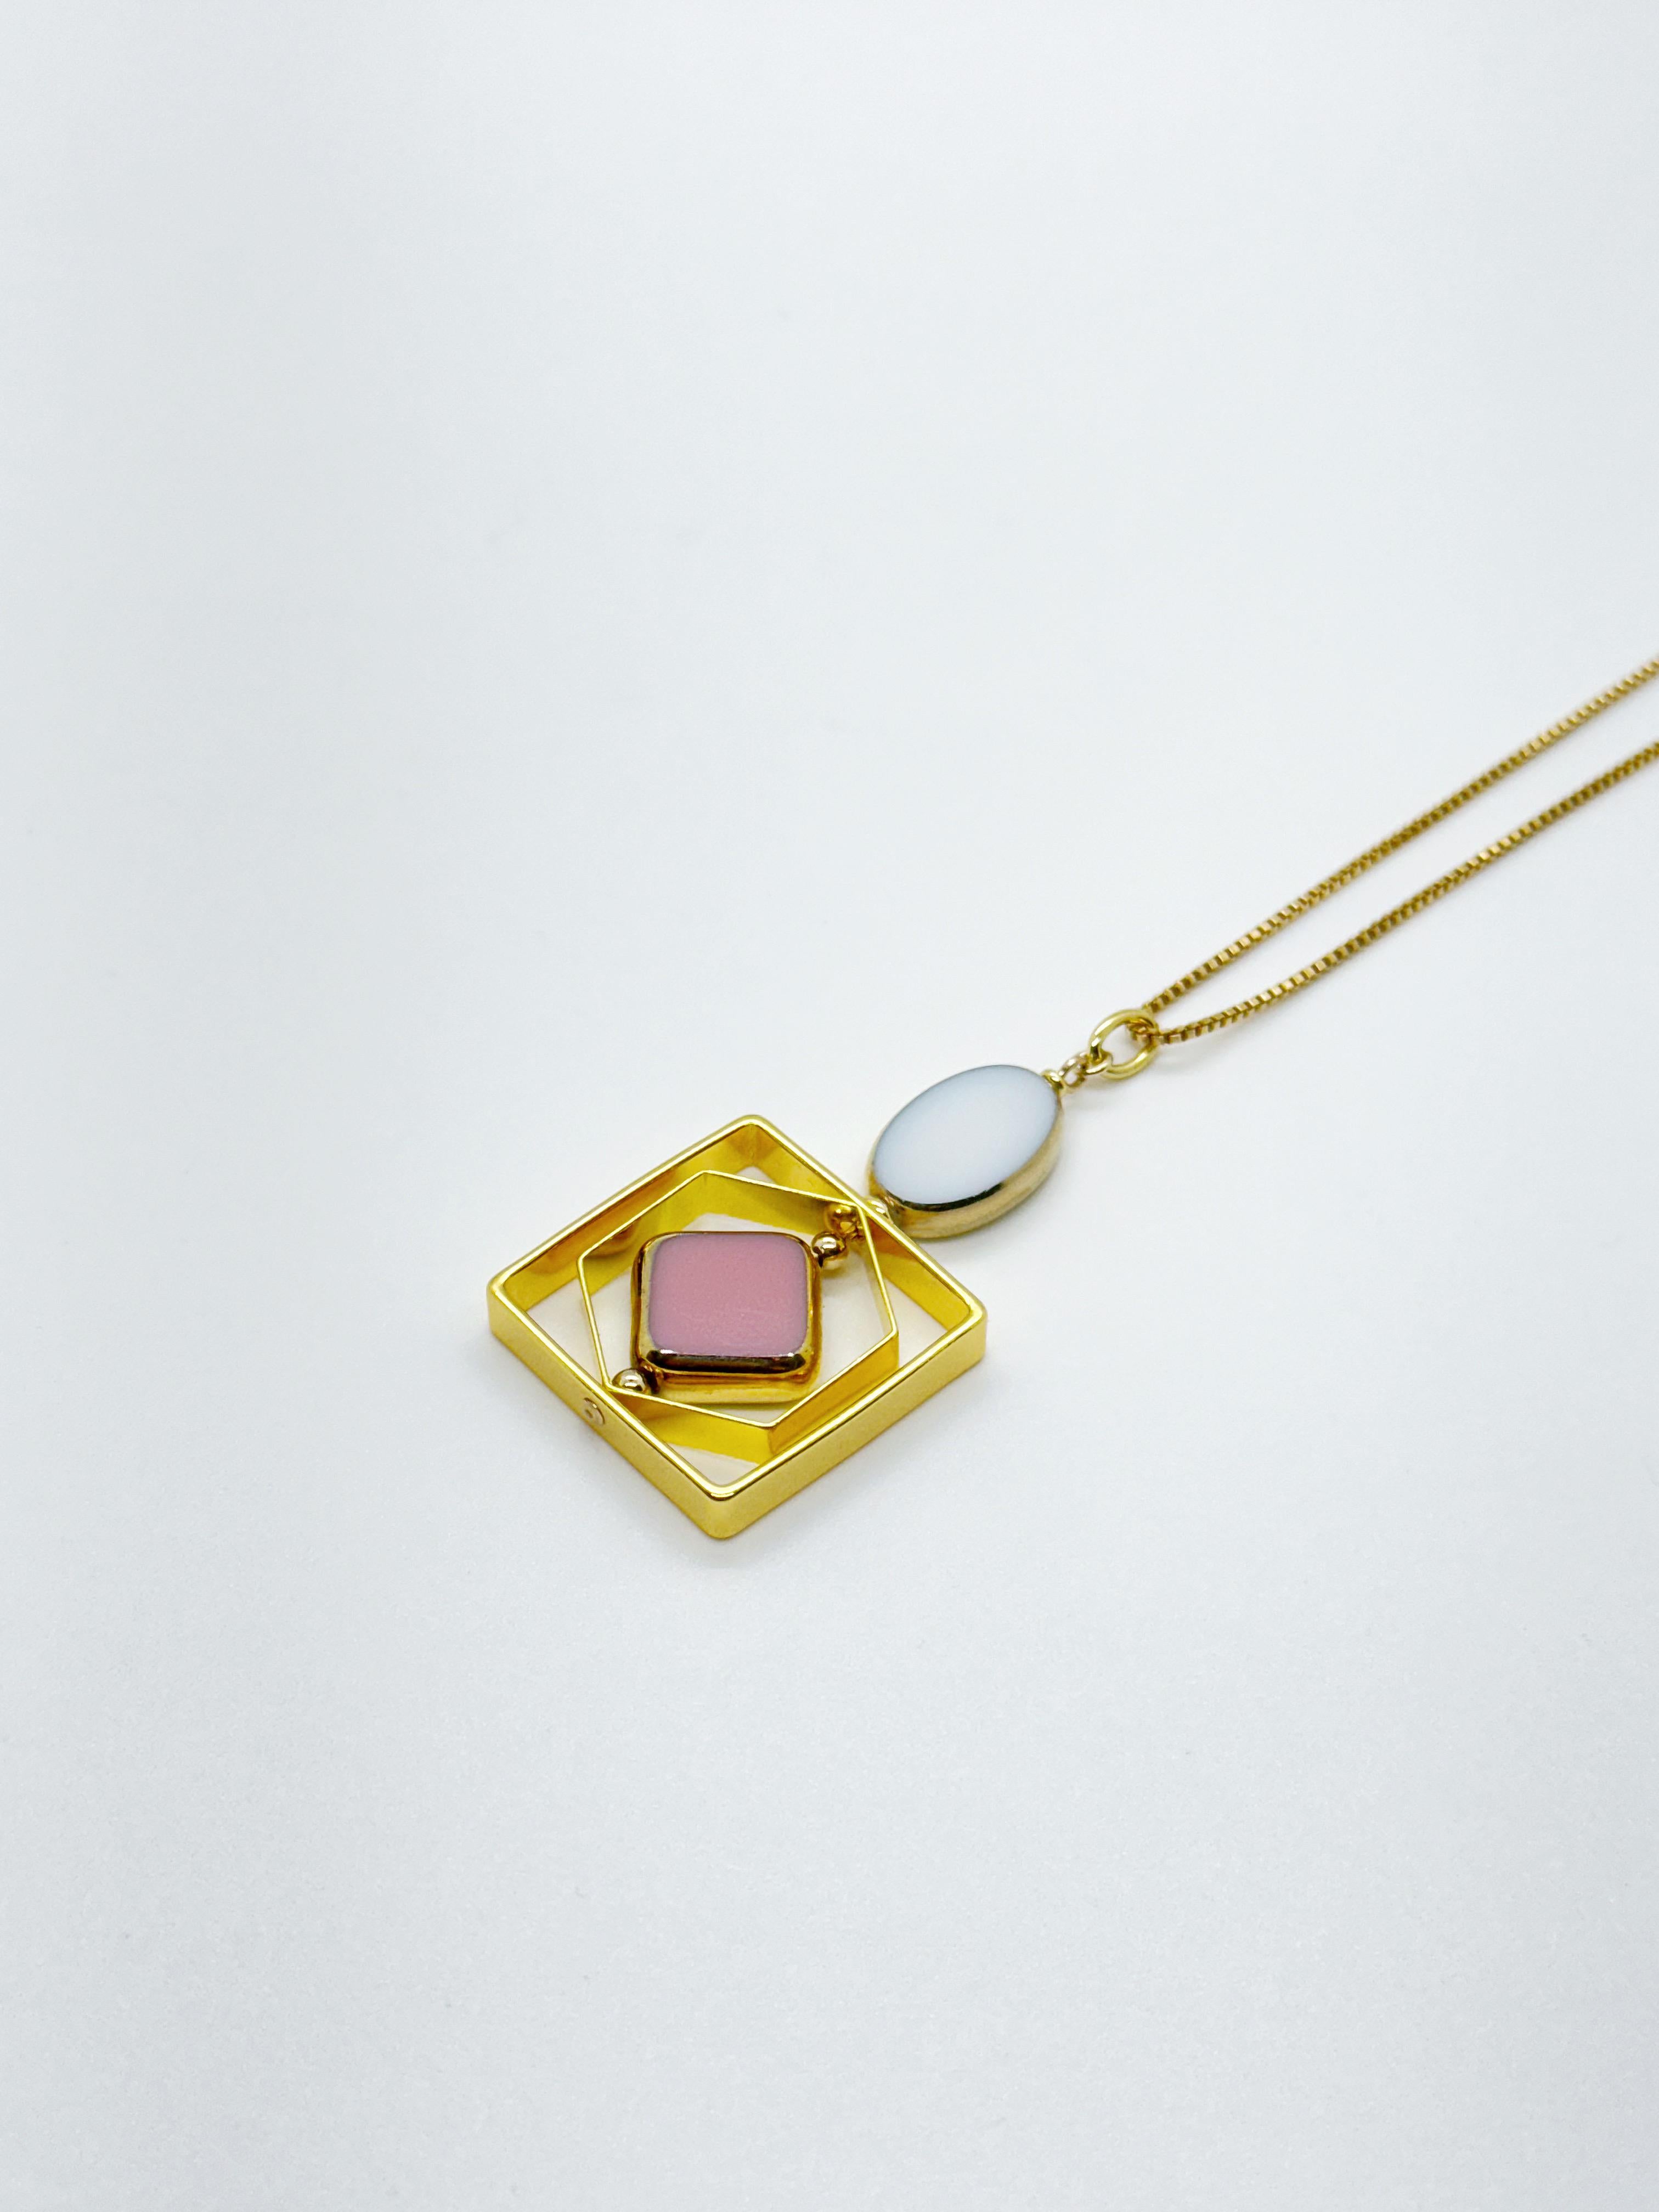 The pendant consists of white and pink vintage German glass beads and is finished with an 18-inch gold-filled chain. 

The beads are new old stock vintage German glass beads that are framed with 24K gold. The beads were hand-pressed during the